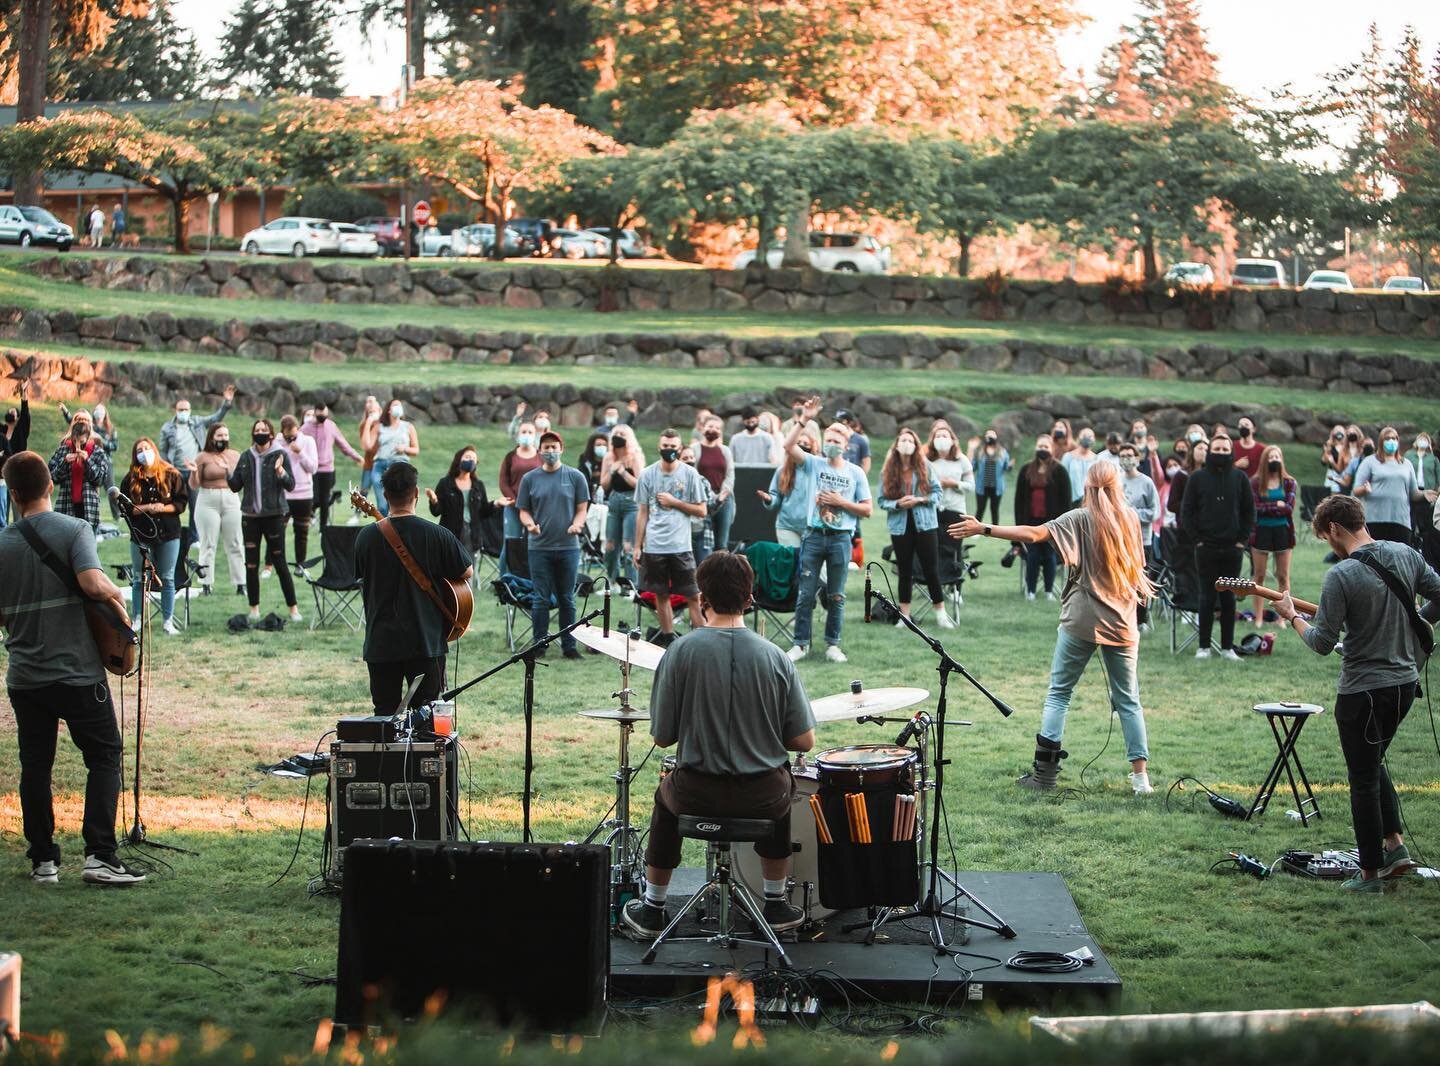 Every Monday night we have Pursuit worship gatherings and with the current circumstances, we&rsquo;ve moved outside. We&rsquo;ve had the most incredible experiences praying and worshipping together outdoors and we hope you&rsquo;ll join us again on M